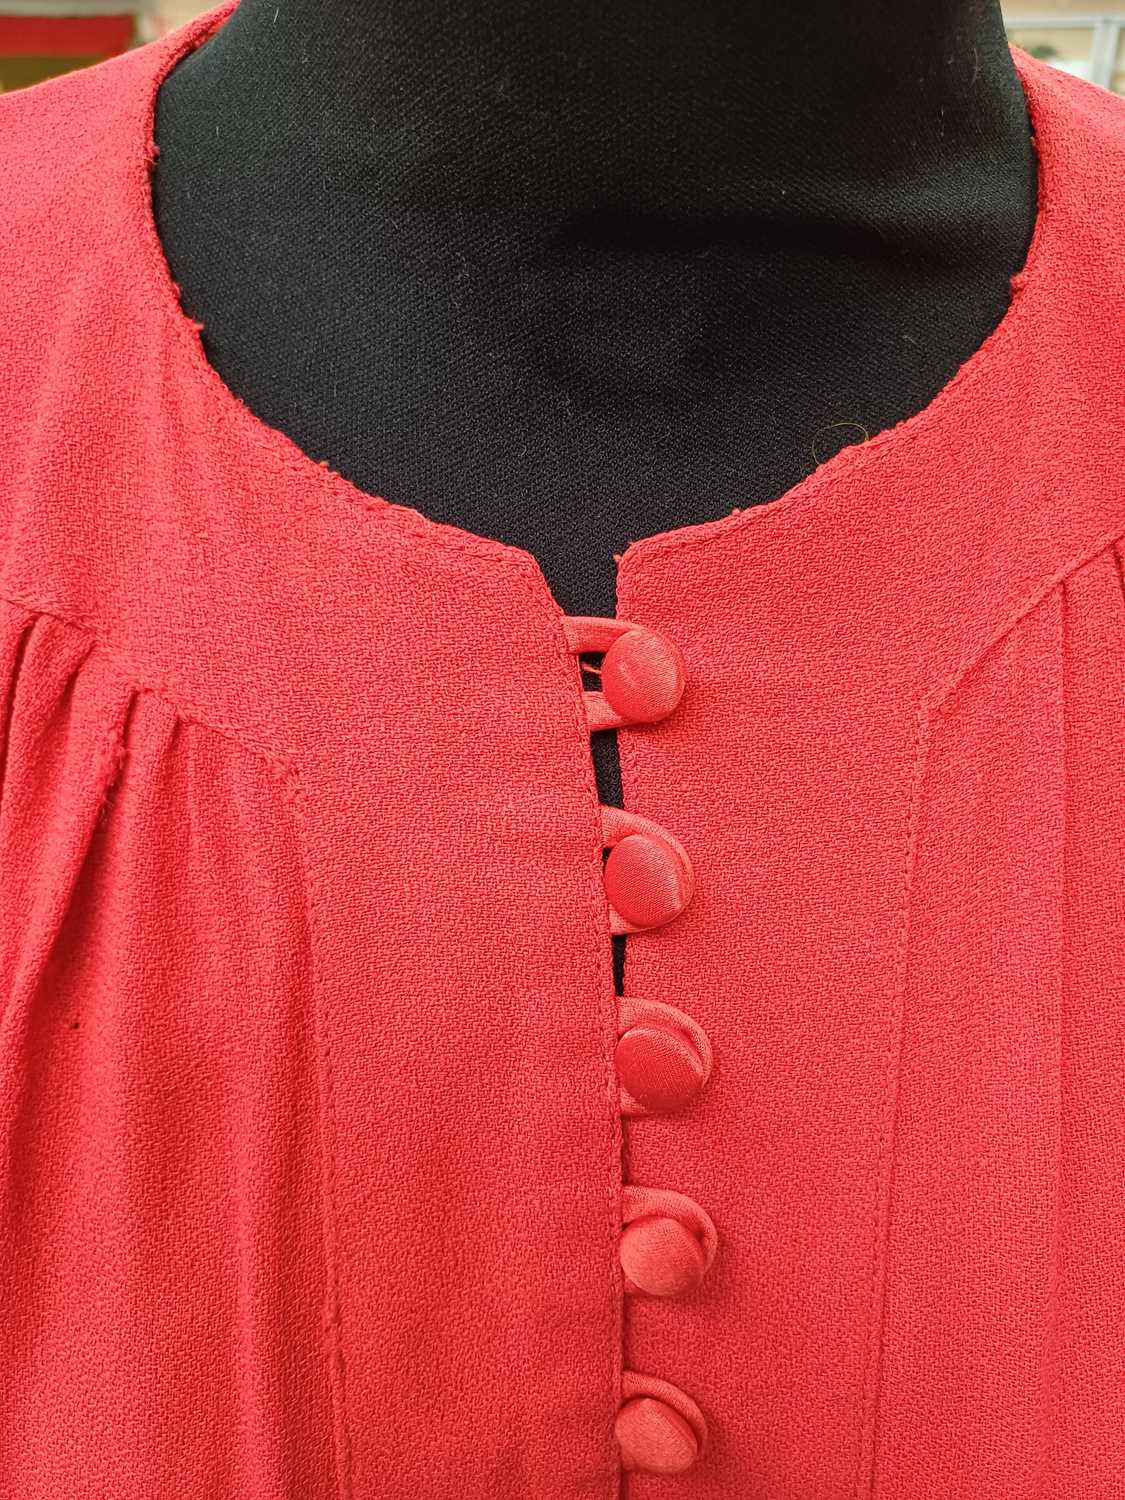 Ossie Clark Red Moss Crepe Long Dress with long sleeves, covered buttons with loop fastenings to the - Image 9 of 20